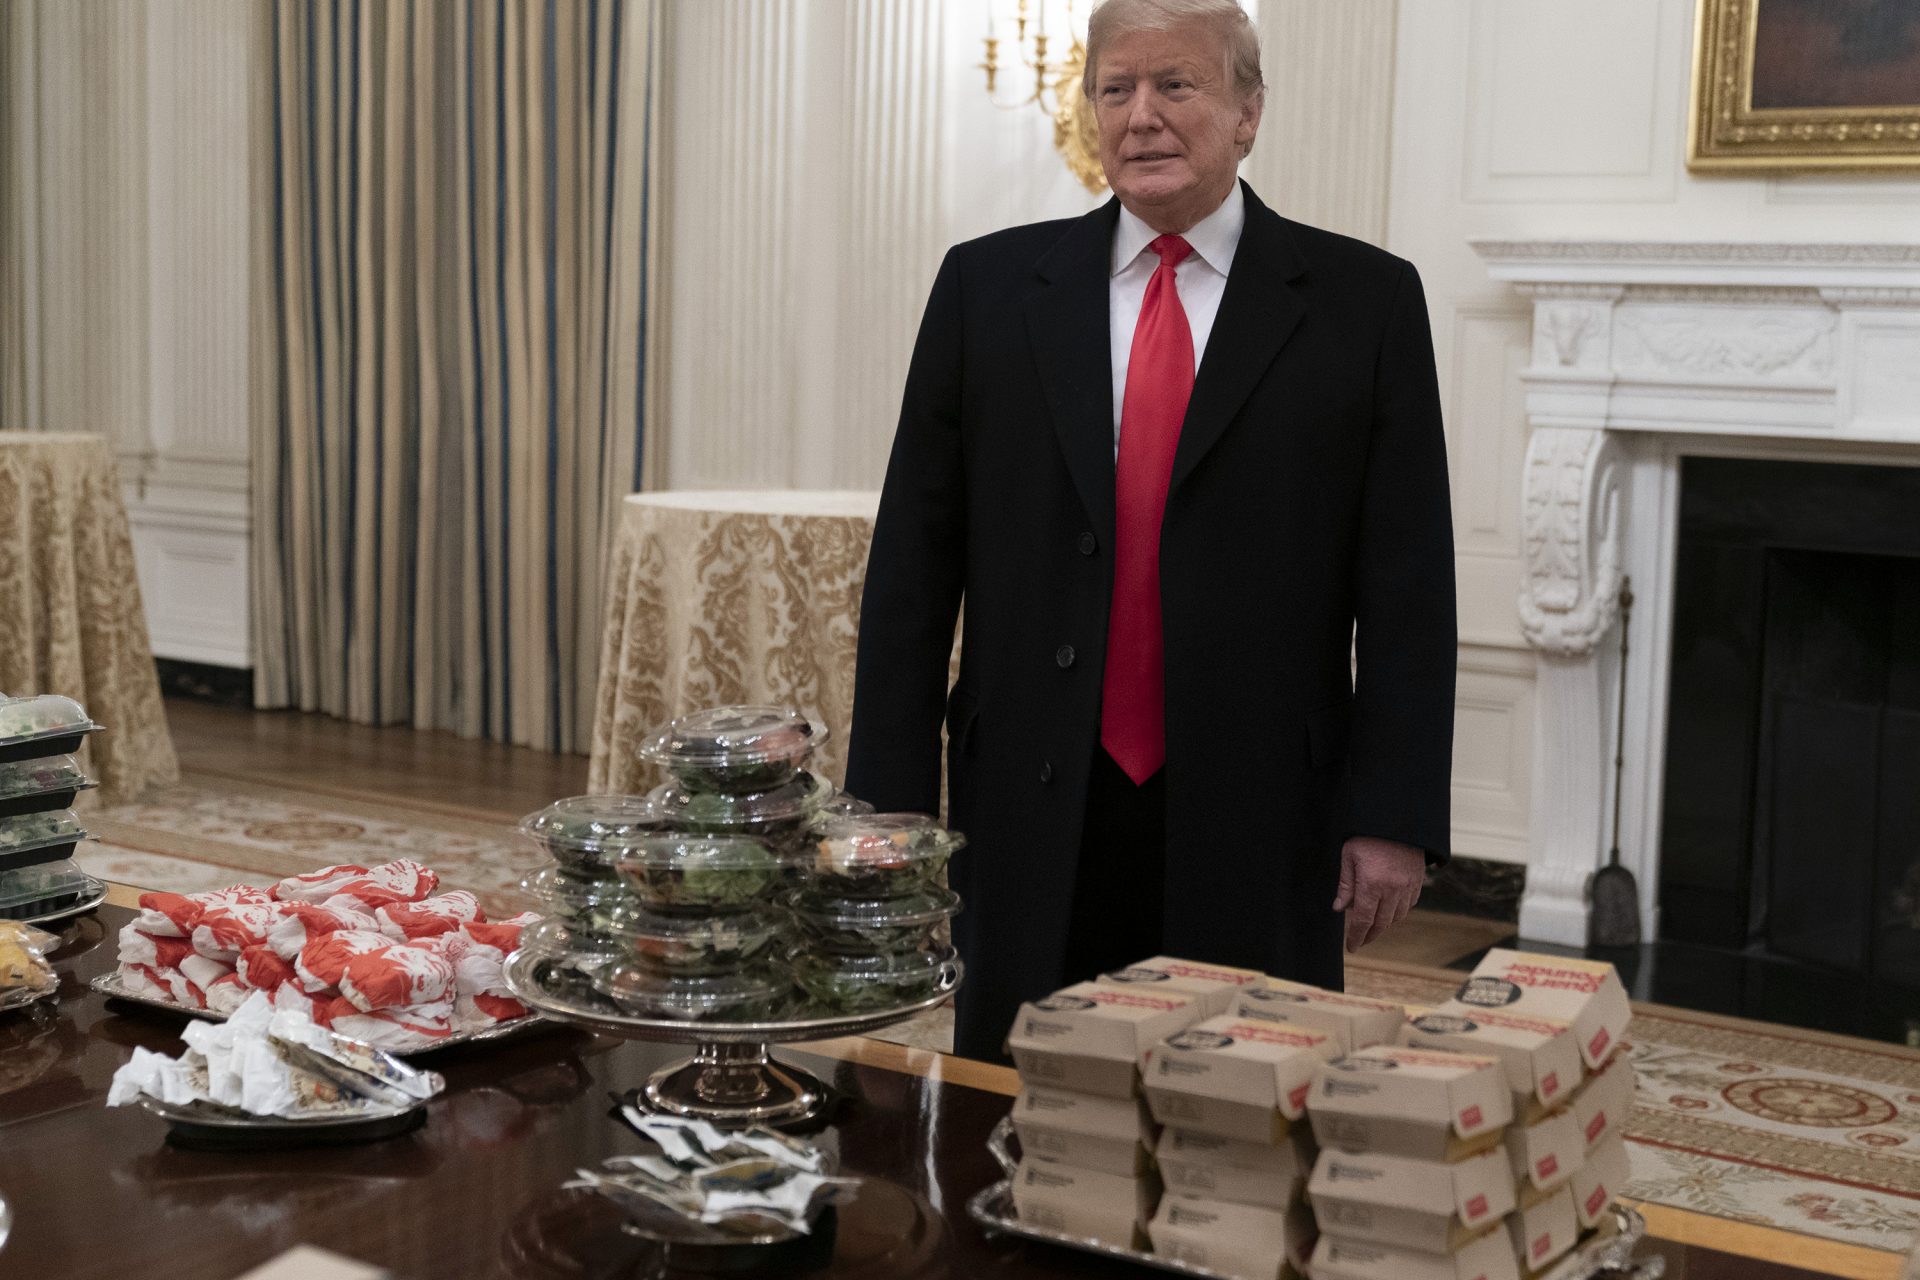 Trump’s Fast Food Football Feast in the White House